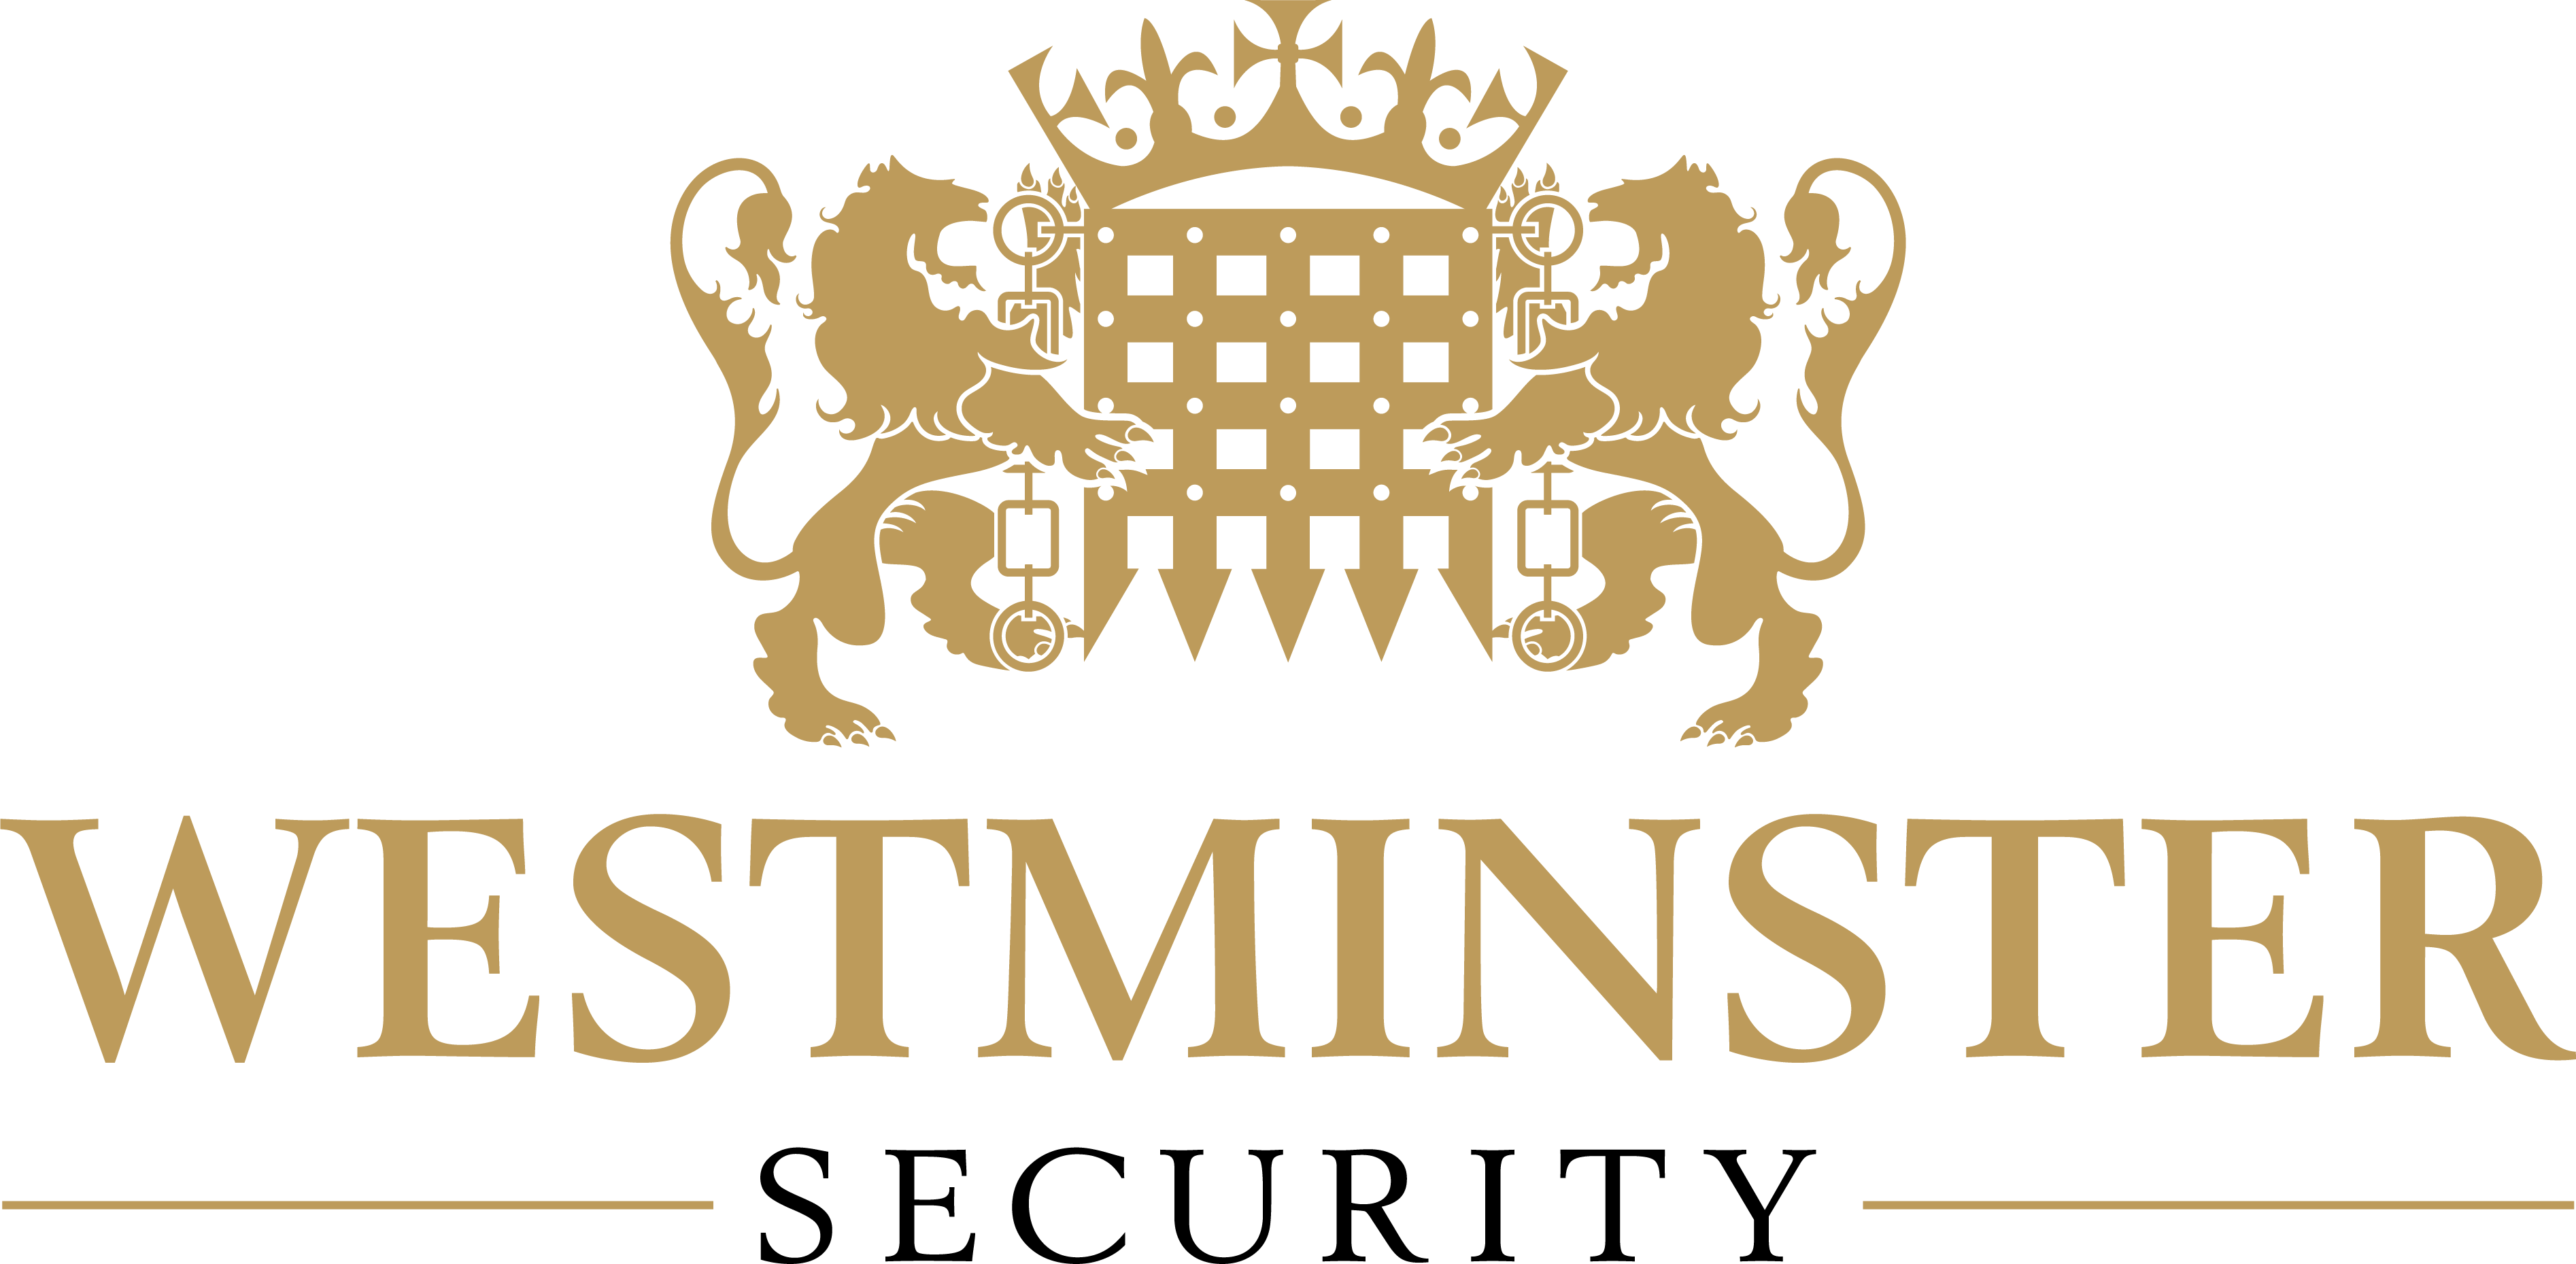 WestminsterSecurity_Logo@2x.png